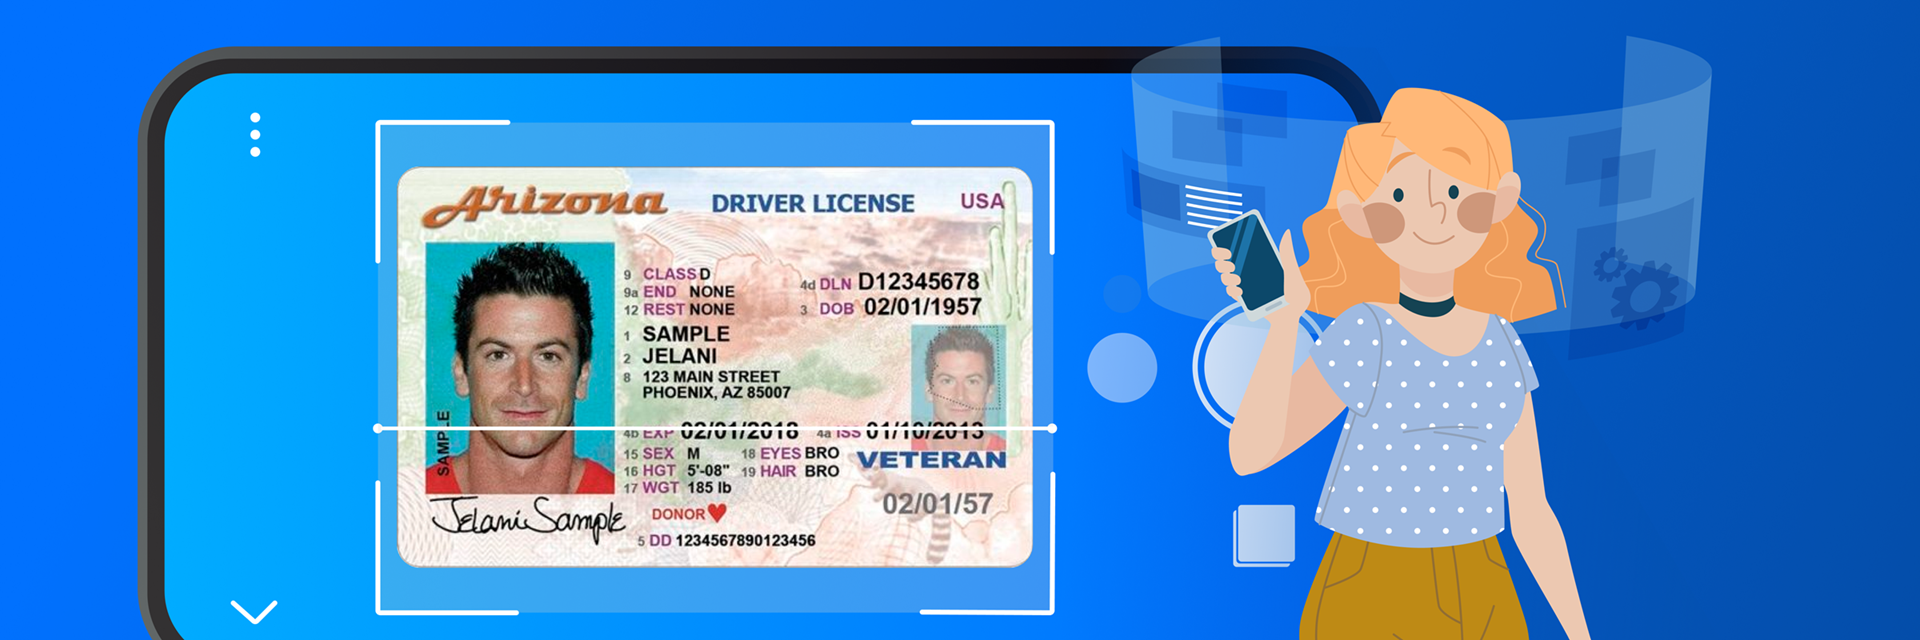 Driver License Parser: A step forward in document digitalization and automation for fleet-related businesses